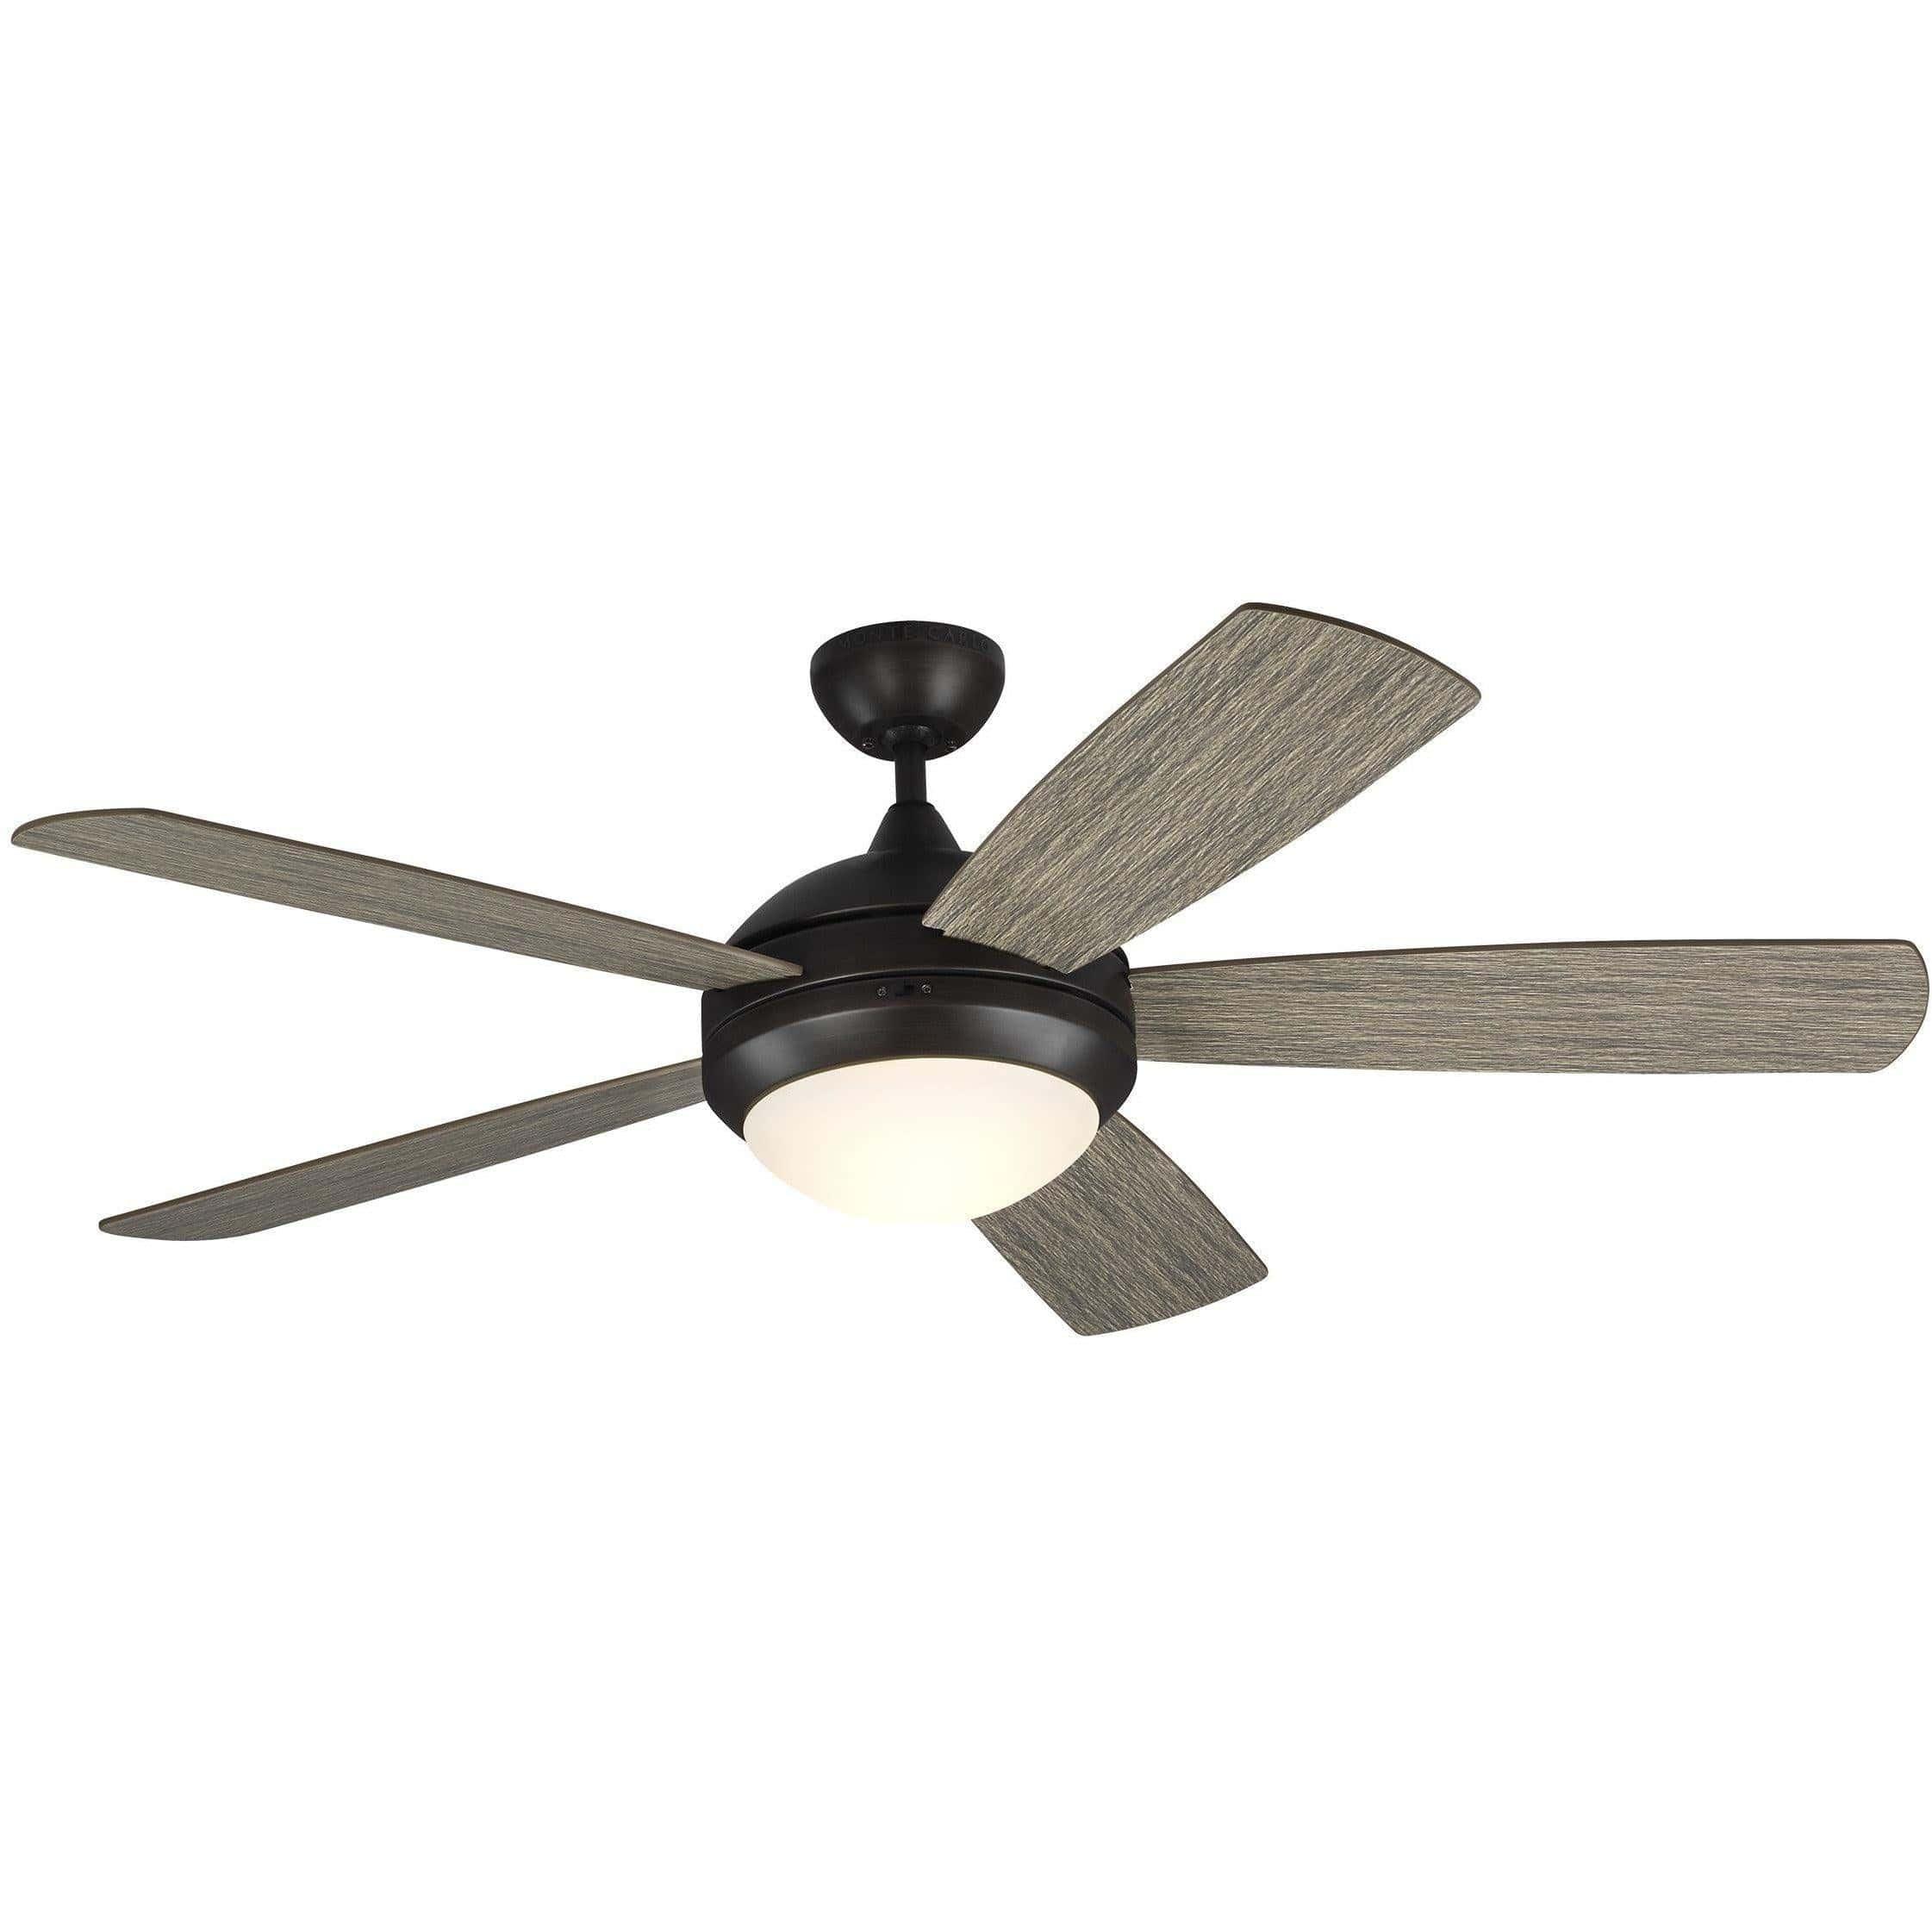 Visual Comfort Fan Collection - Discus Classic Smart 52" Ceiling Fan - 5DISM52AGPD | Montreal Lighting & Hardware